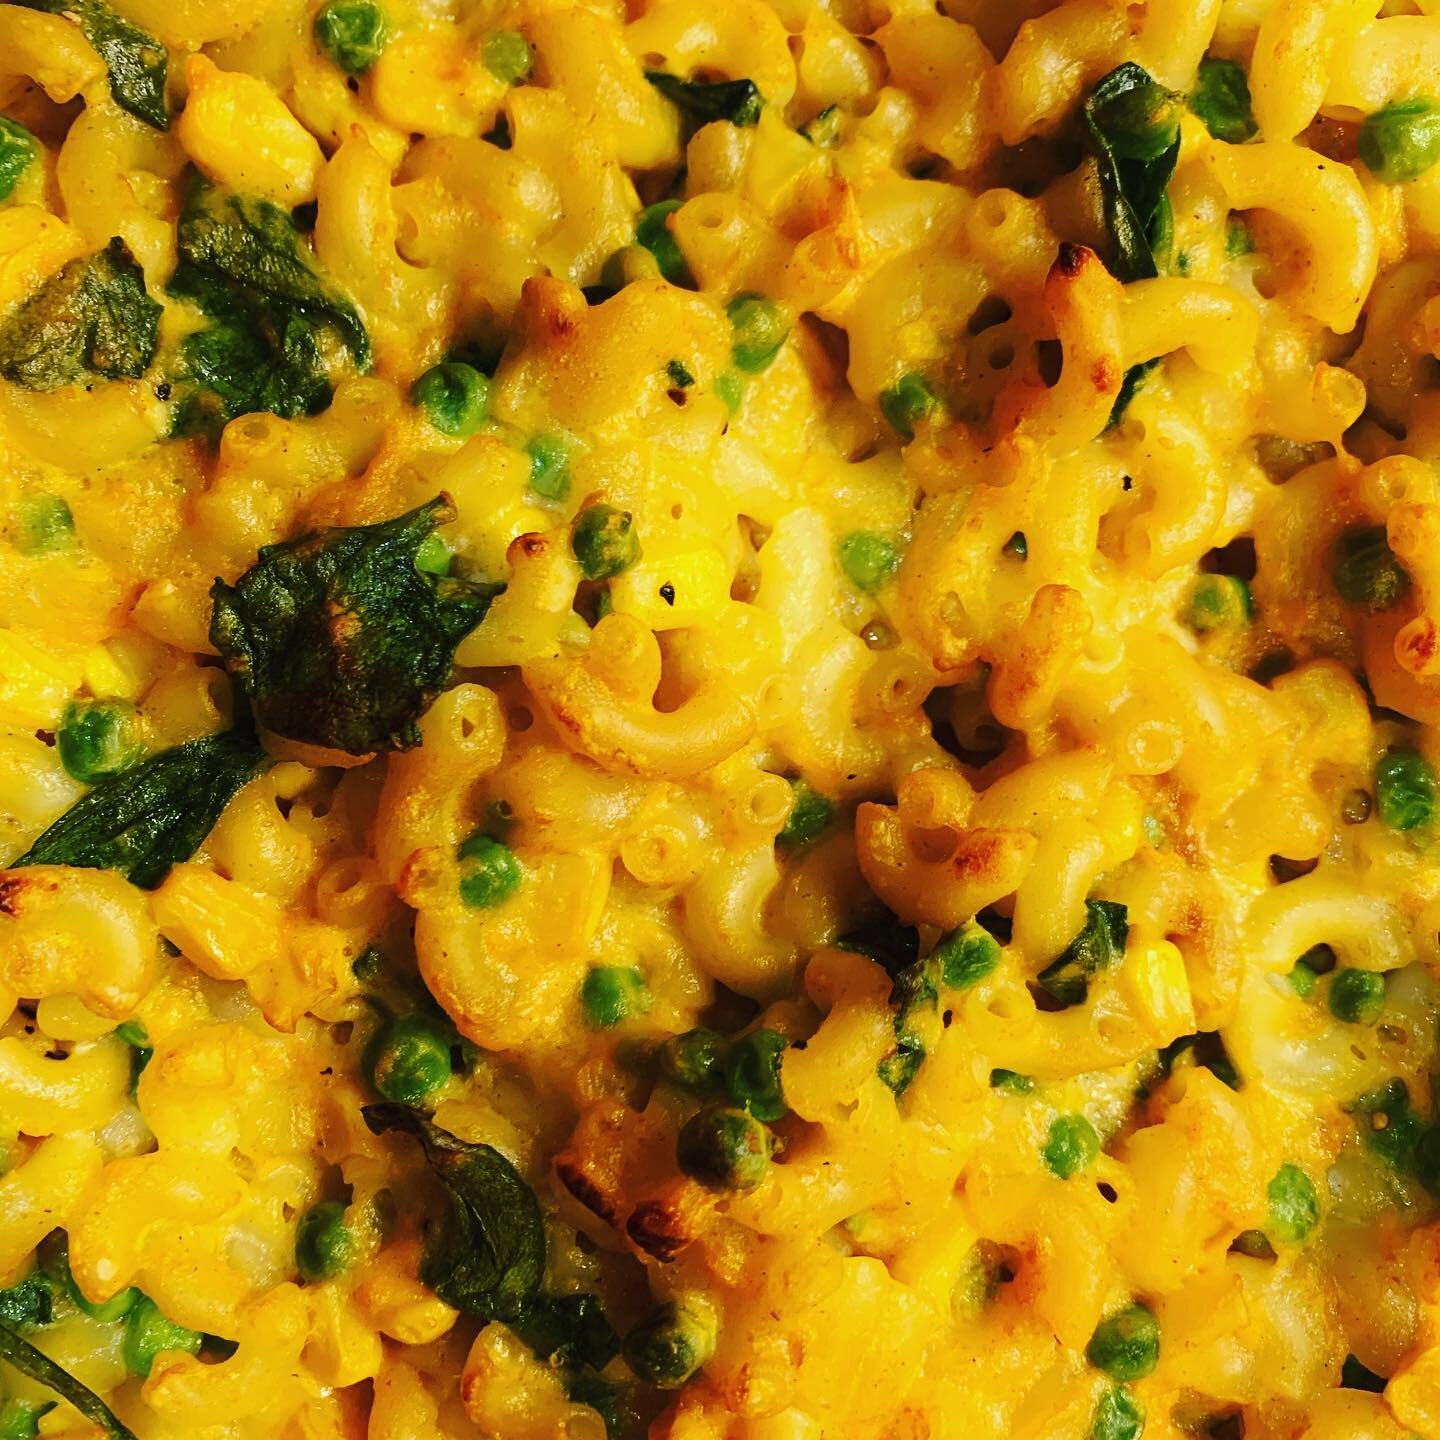 This macaroni cheese was the best we&rsquo;ve had for a while. I pimped it up with loads of spinach, peas, sweetcorn, and... baked sweet potato. The sweet potato made it ultra creamy and rich - and it upped the nutrient count. We had it with a simple